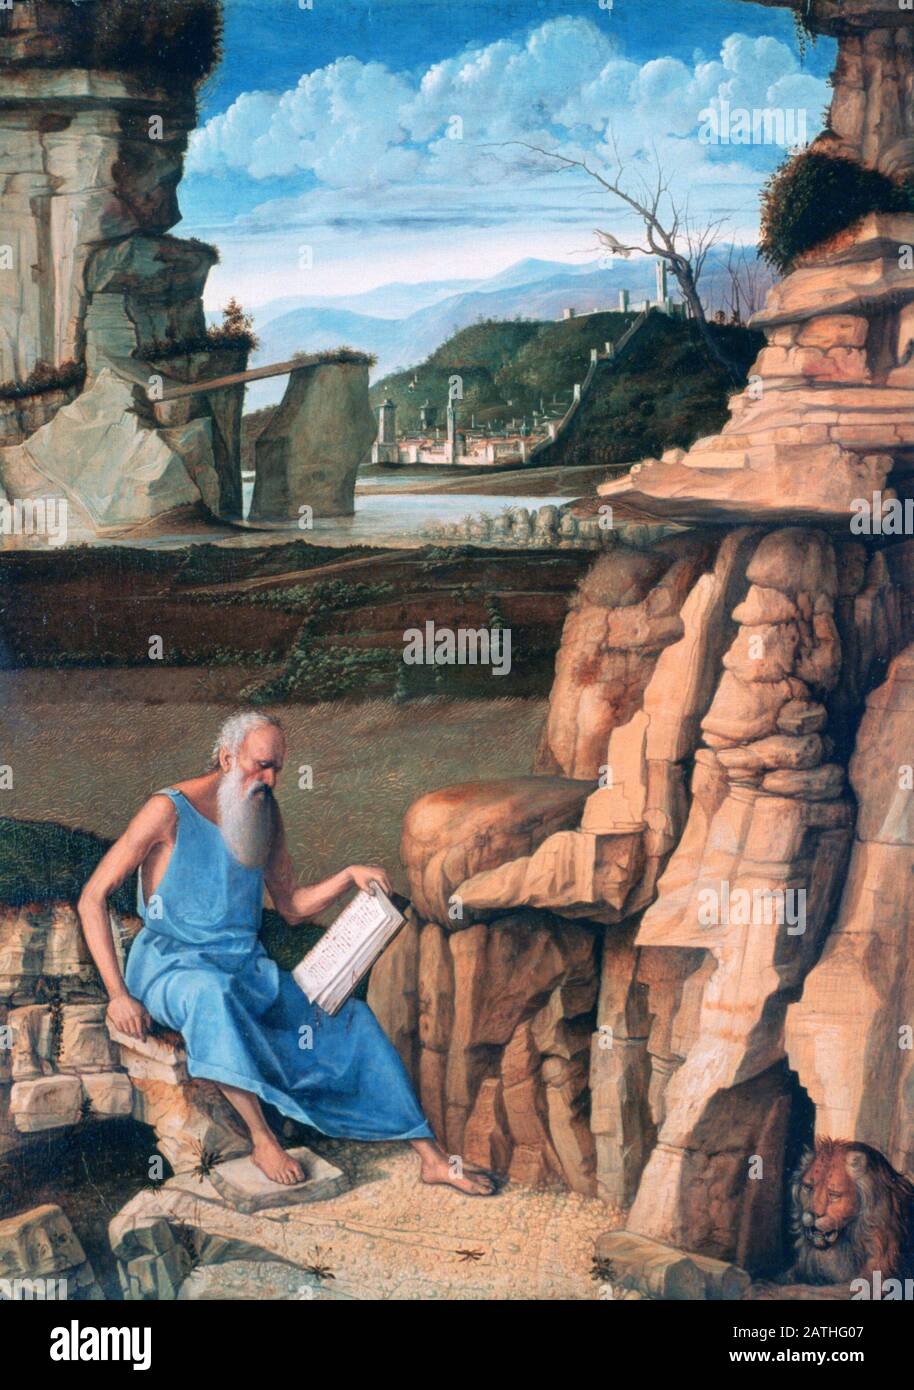 Giovanni Bellini Italian school Saint Jerome reading in a Landscape About 1480-1485 Oil on panel (46.8 x 33.8 cm) London, National Gallery Stock Photo